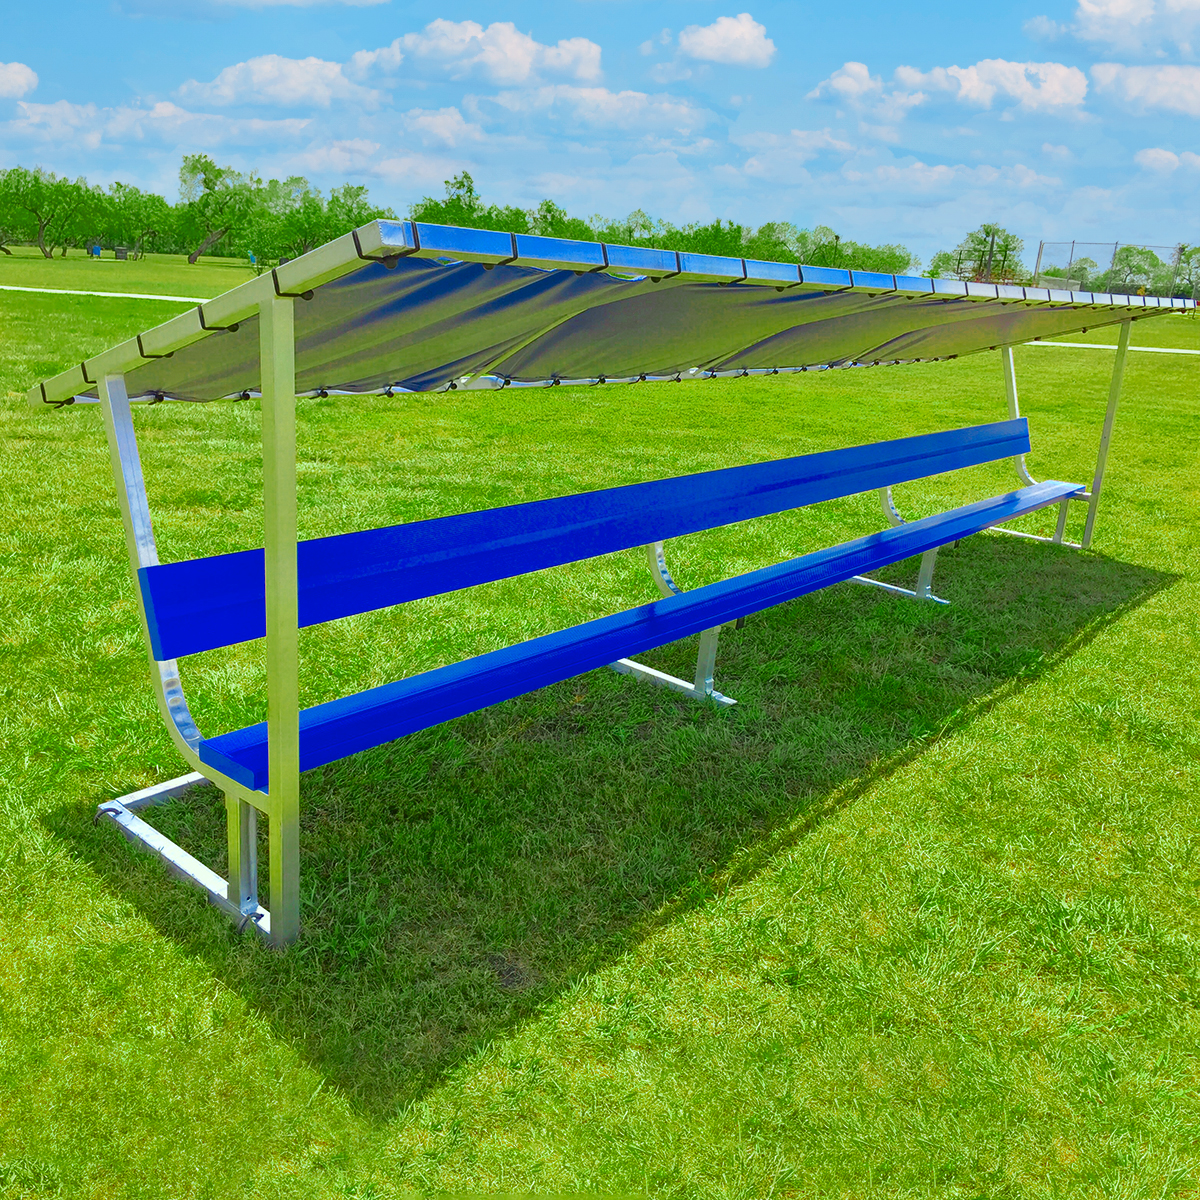 Covered Athletic Team Bench ⋆ Keeper Goals - Your Athletic Equipment